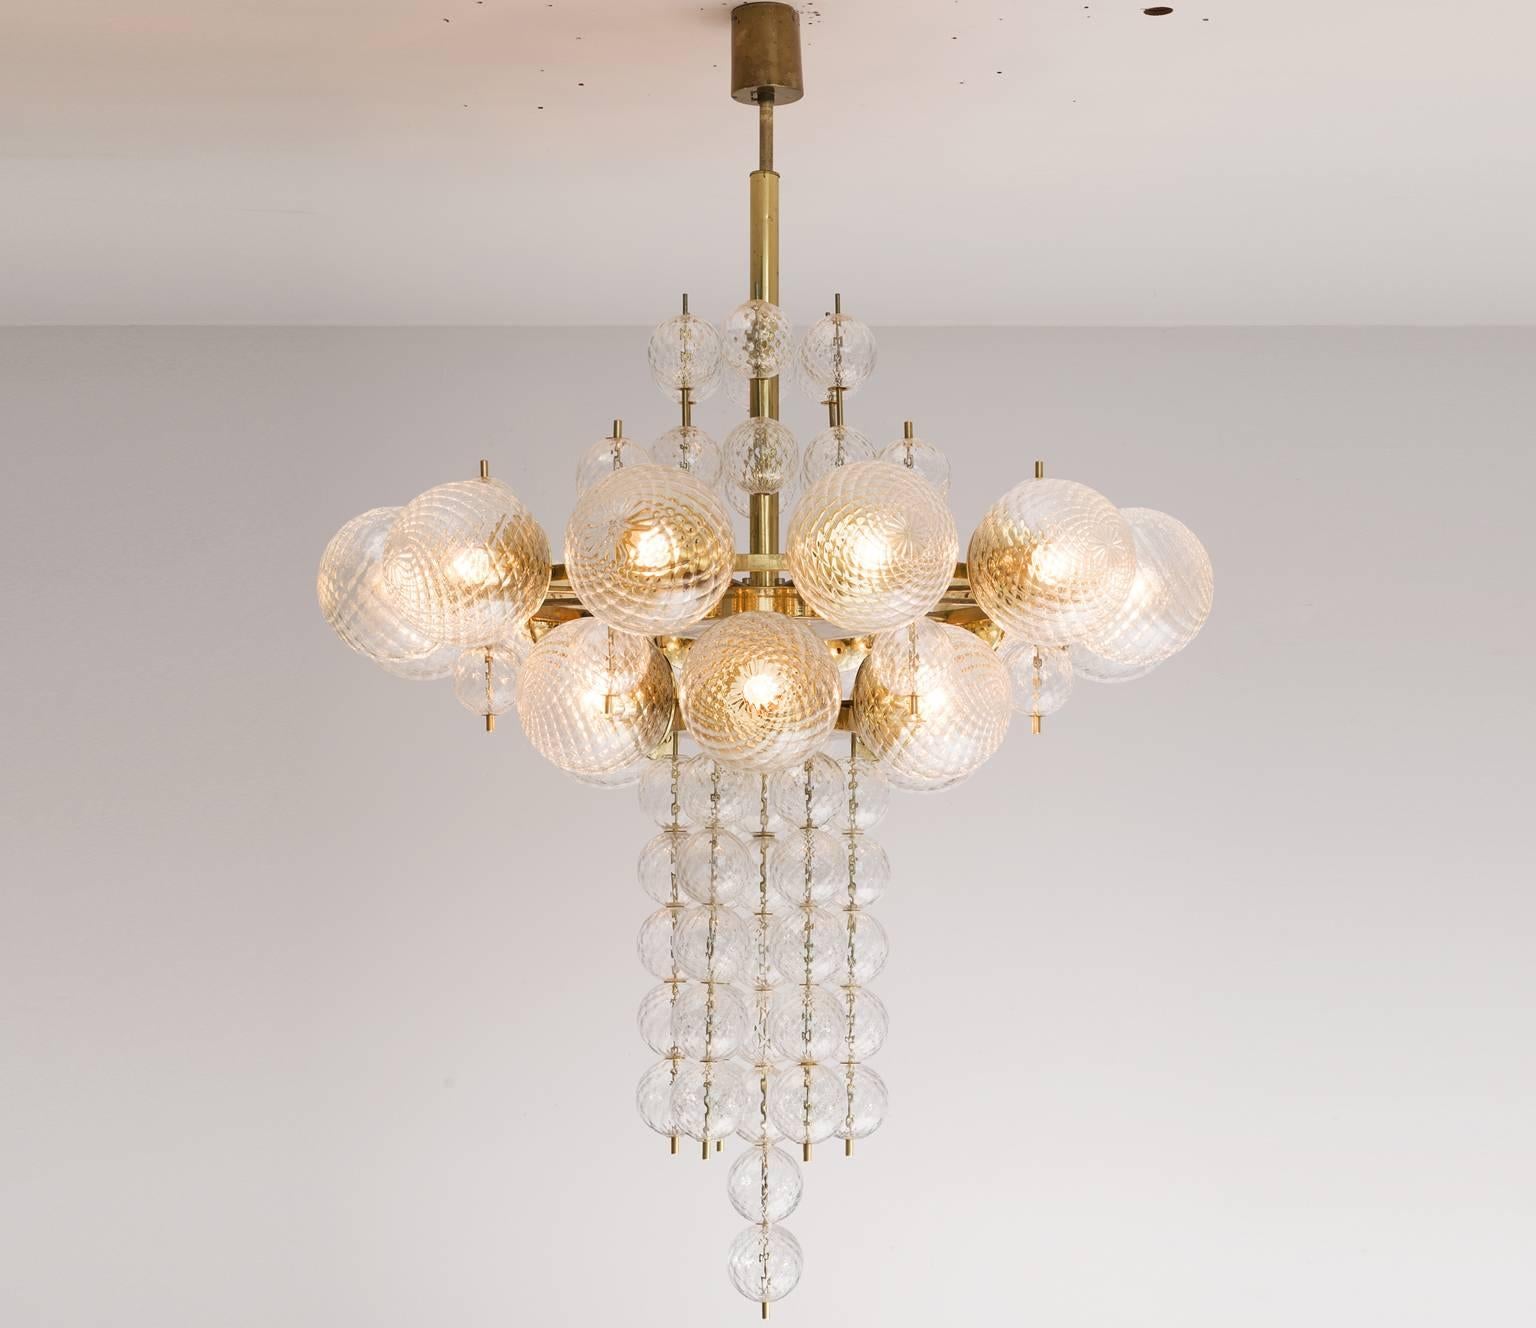 Chandelier in glass and brass, Europe, 1970s.

Large chandelier in structured glass and brass. The structured glass brings a stunning light partition. The patinated brass creates a warm atmosphere. Four items available.

Price listed per item